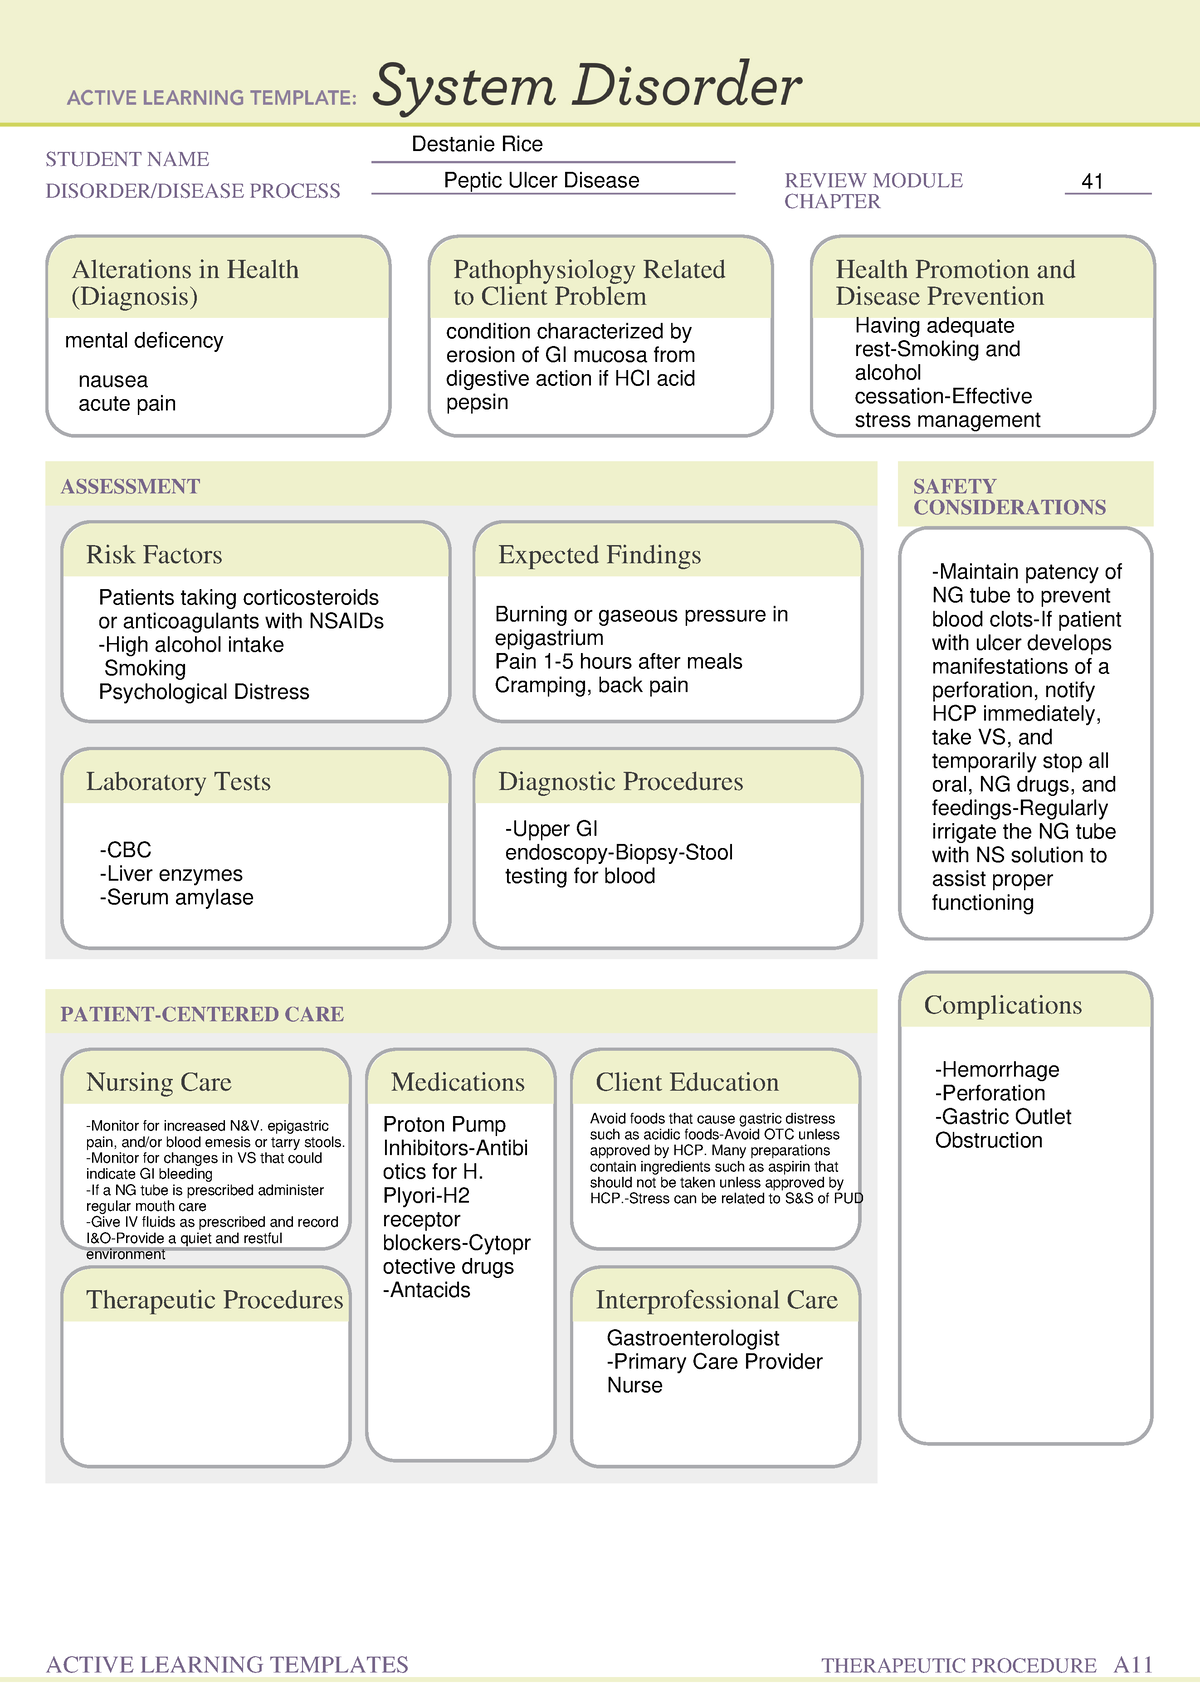 peptic-ulcer-disease-system-disorder-template